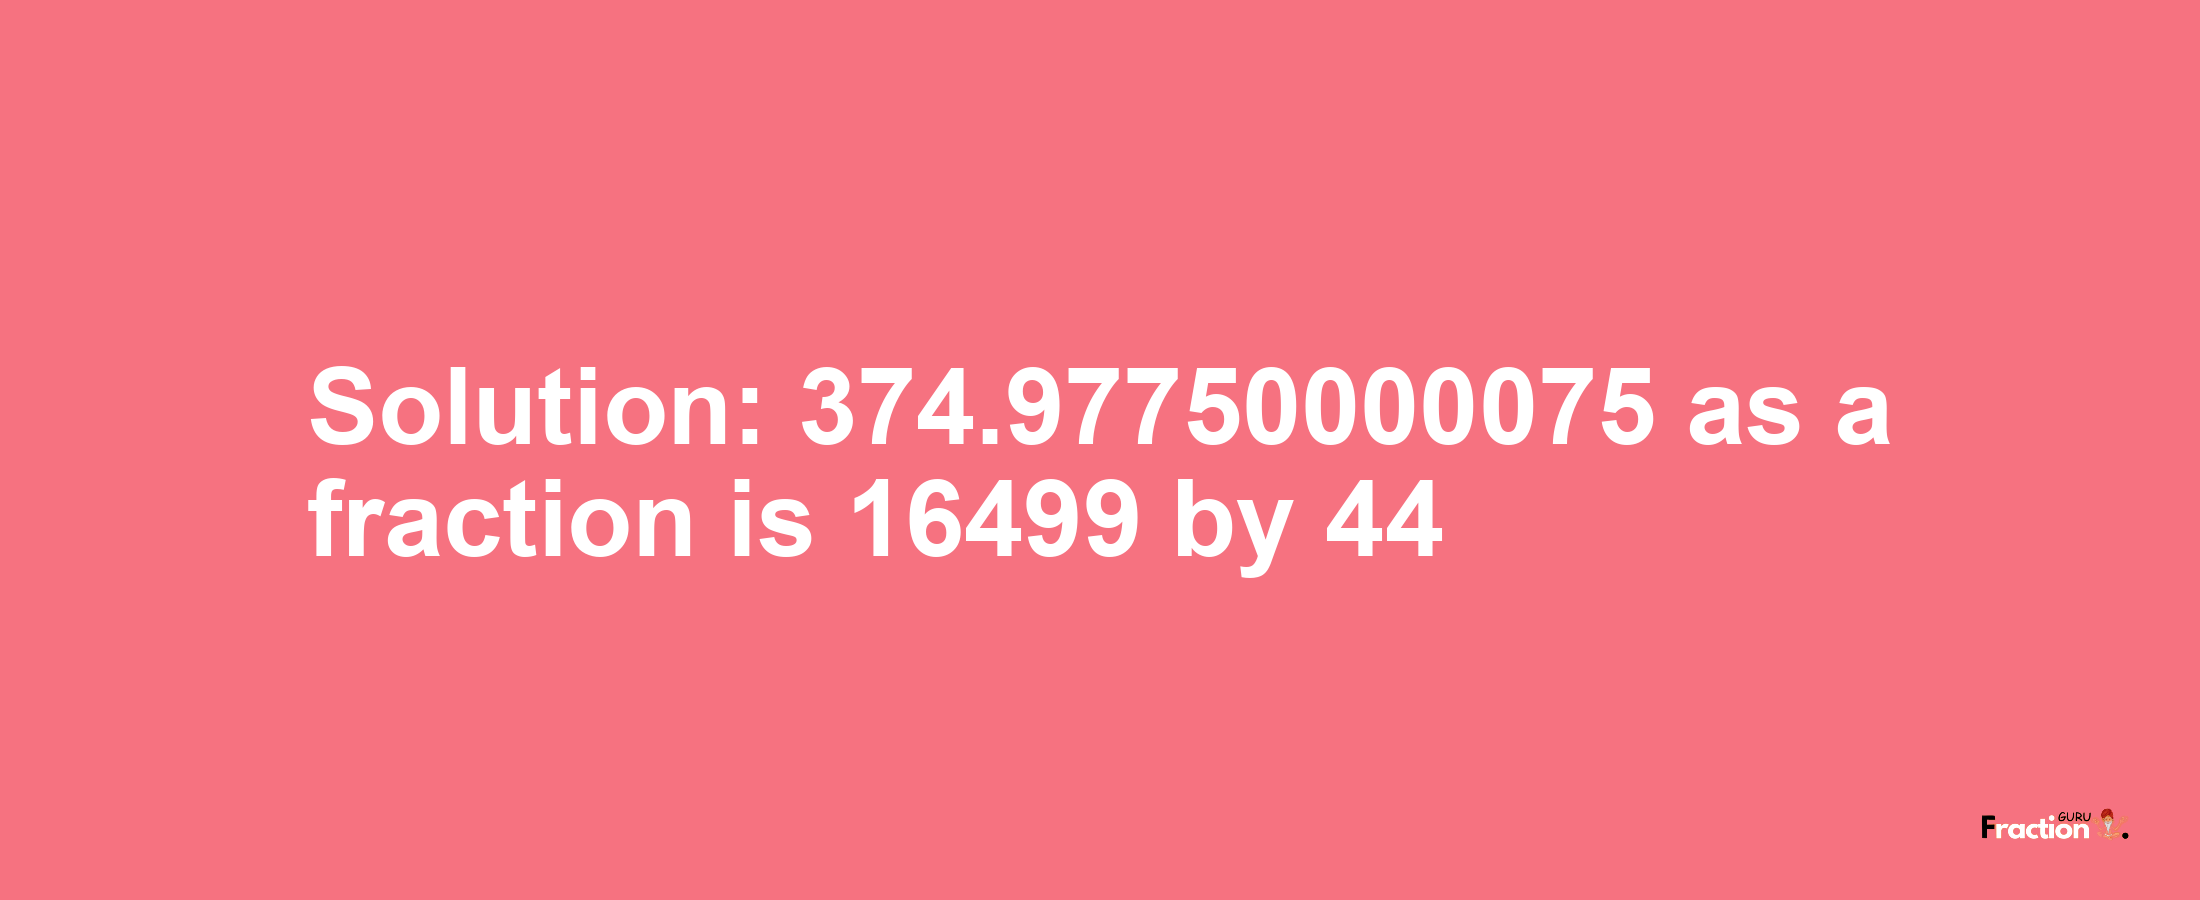 Solution:374.97750000075 as a fraction is 16499/44